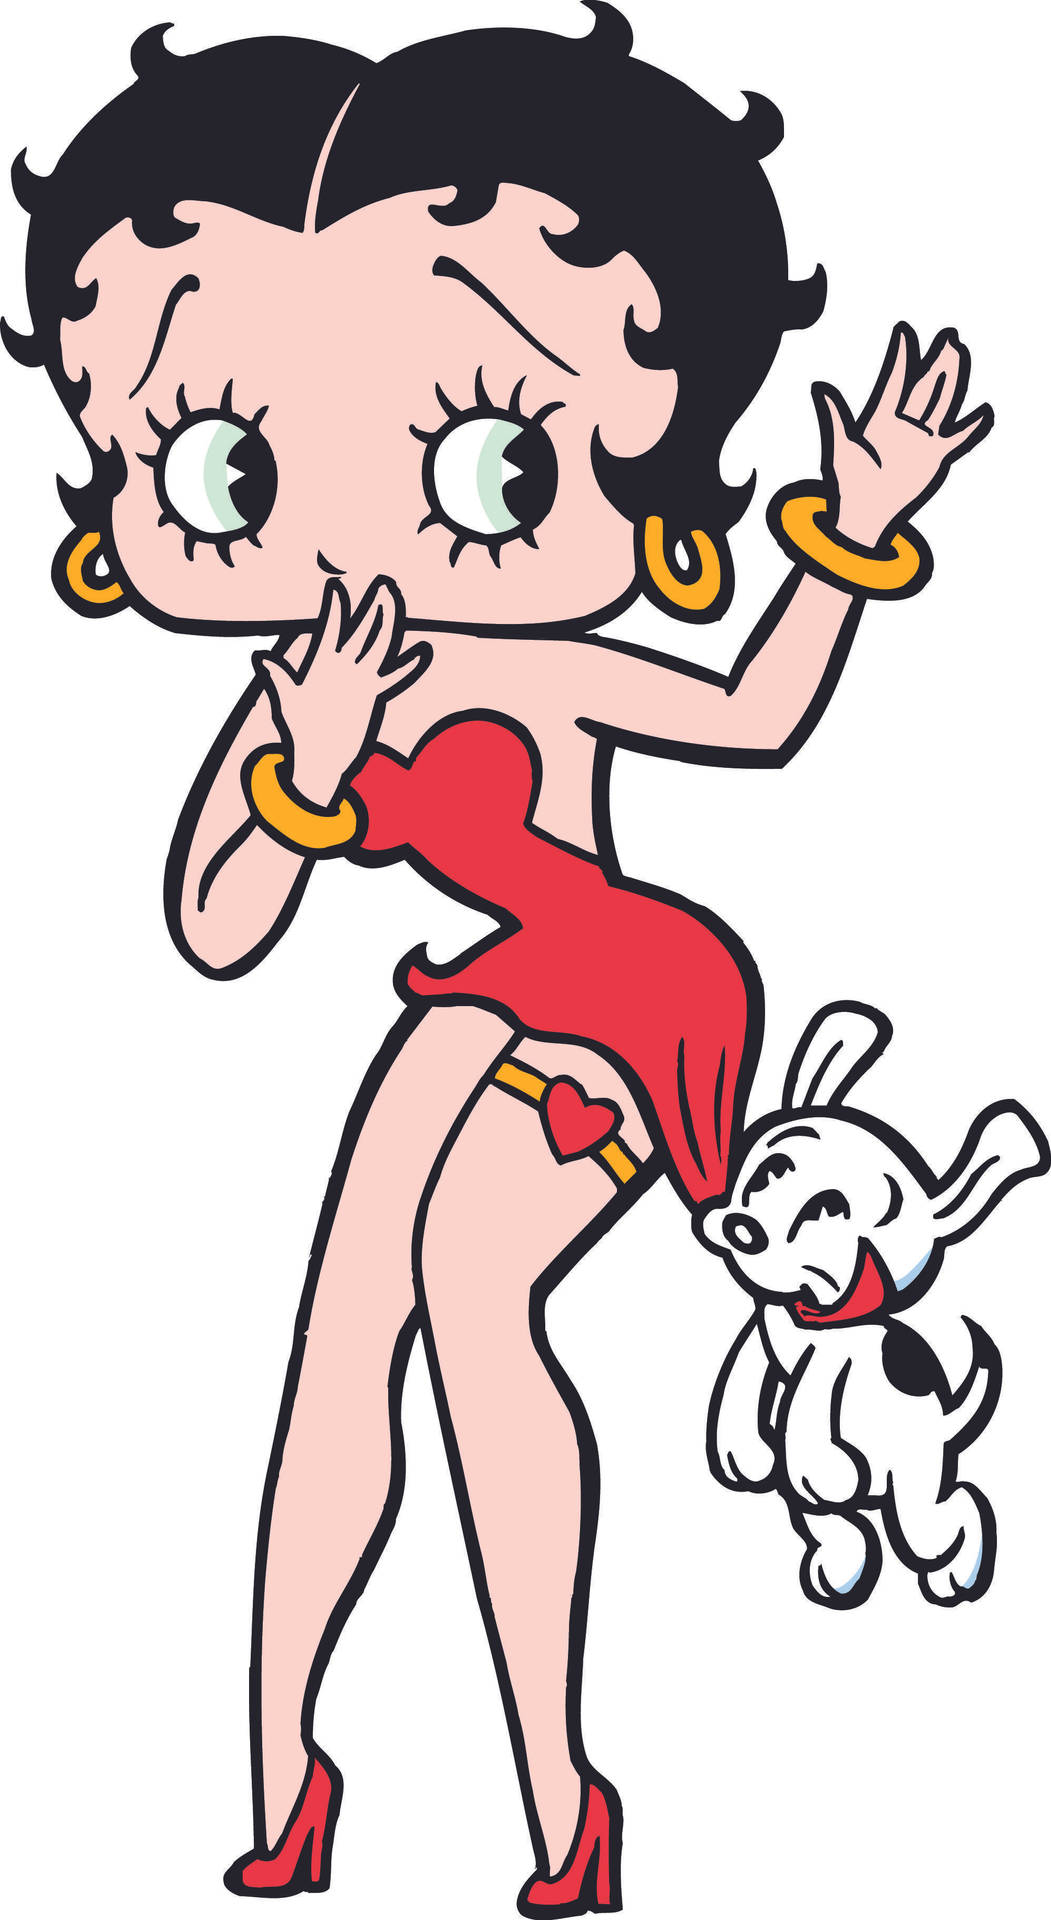 Free Betty Boop Wallpaper Downloads, [100+] Betty Boop Wallpapers for FREE  